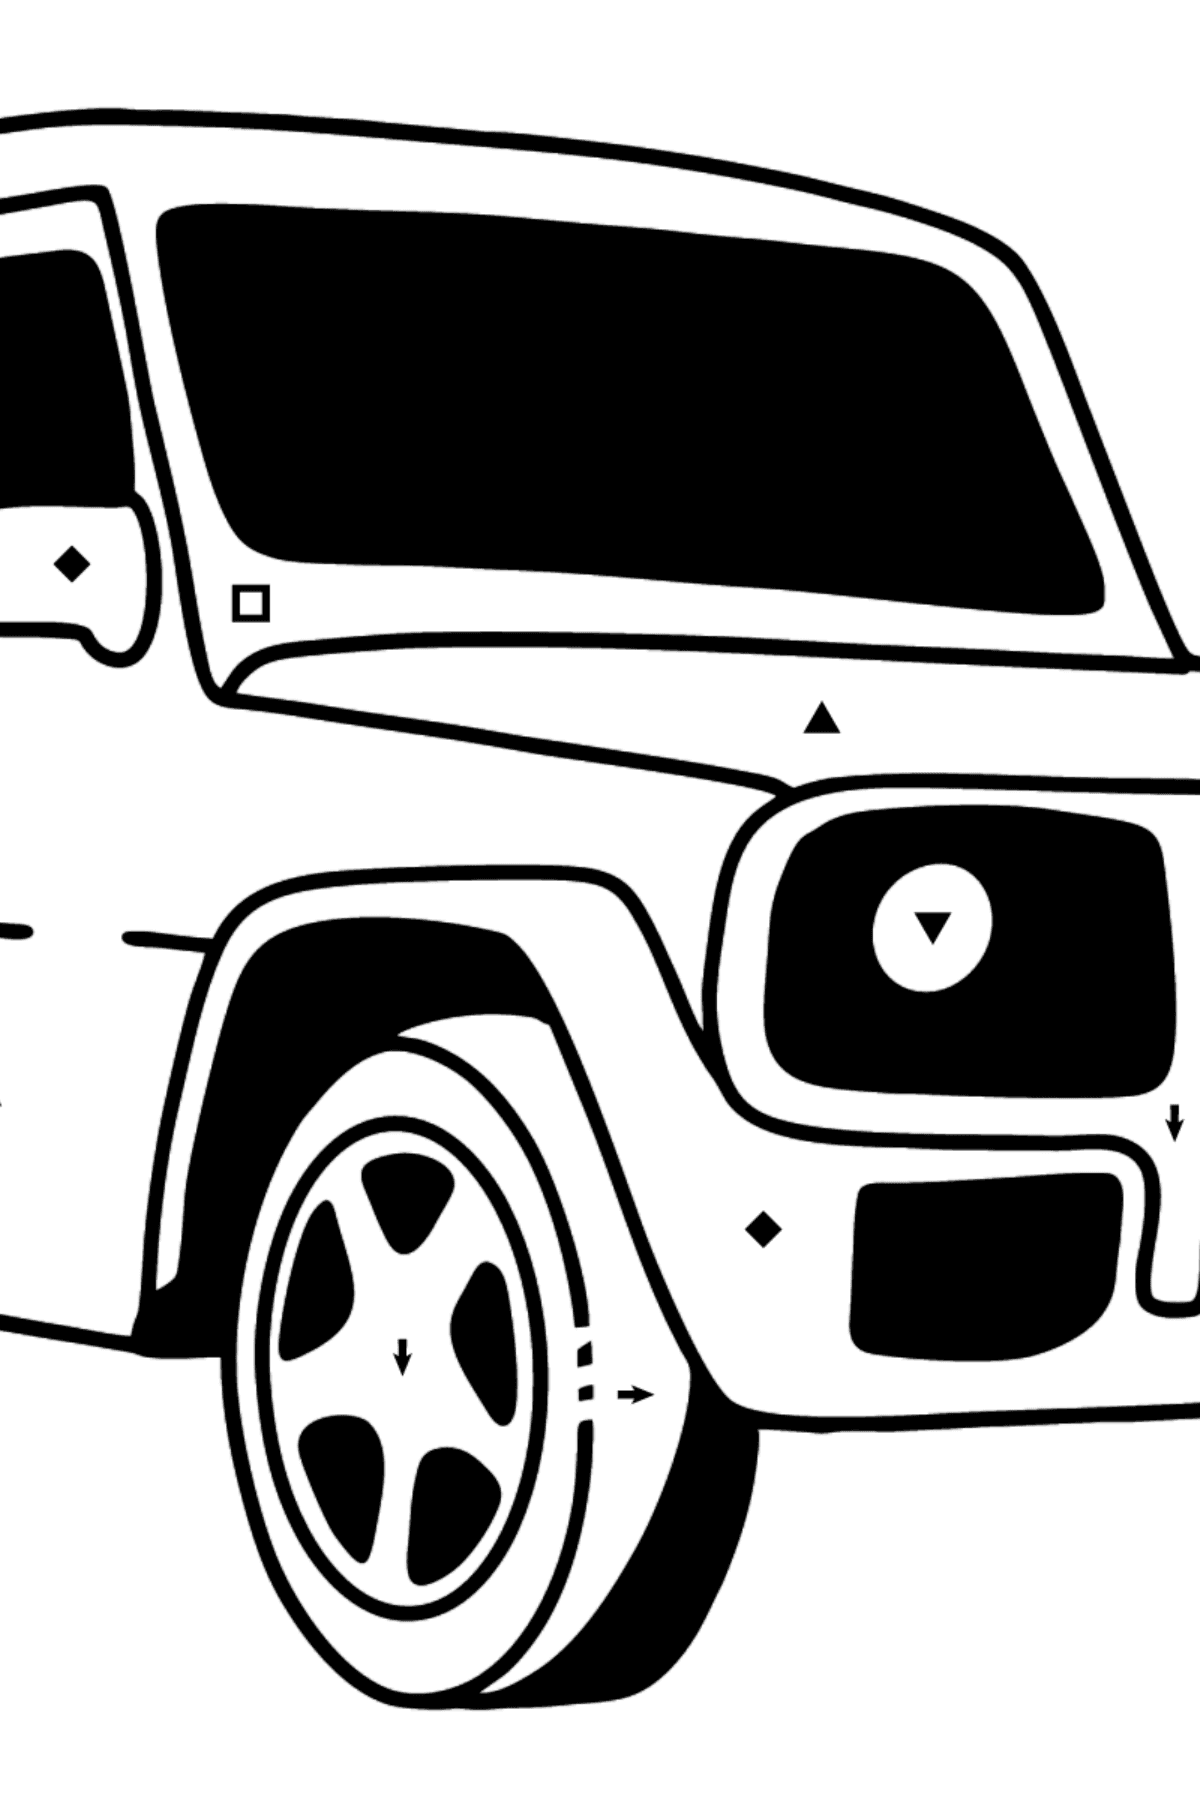 Mercedes-Benz G-Class SUV coloring page - Coloring by Symbols for Kids